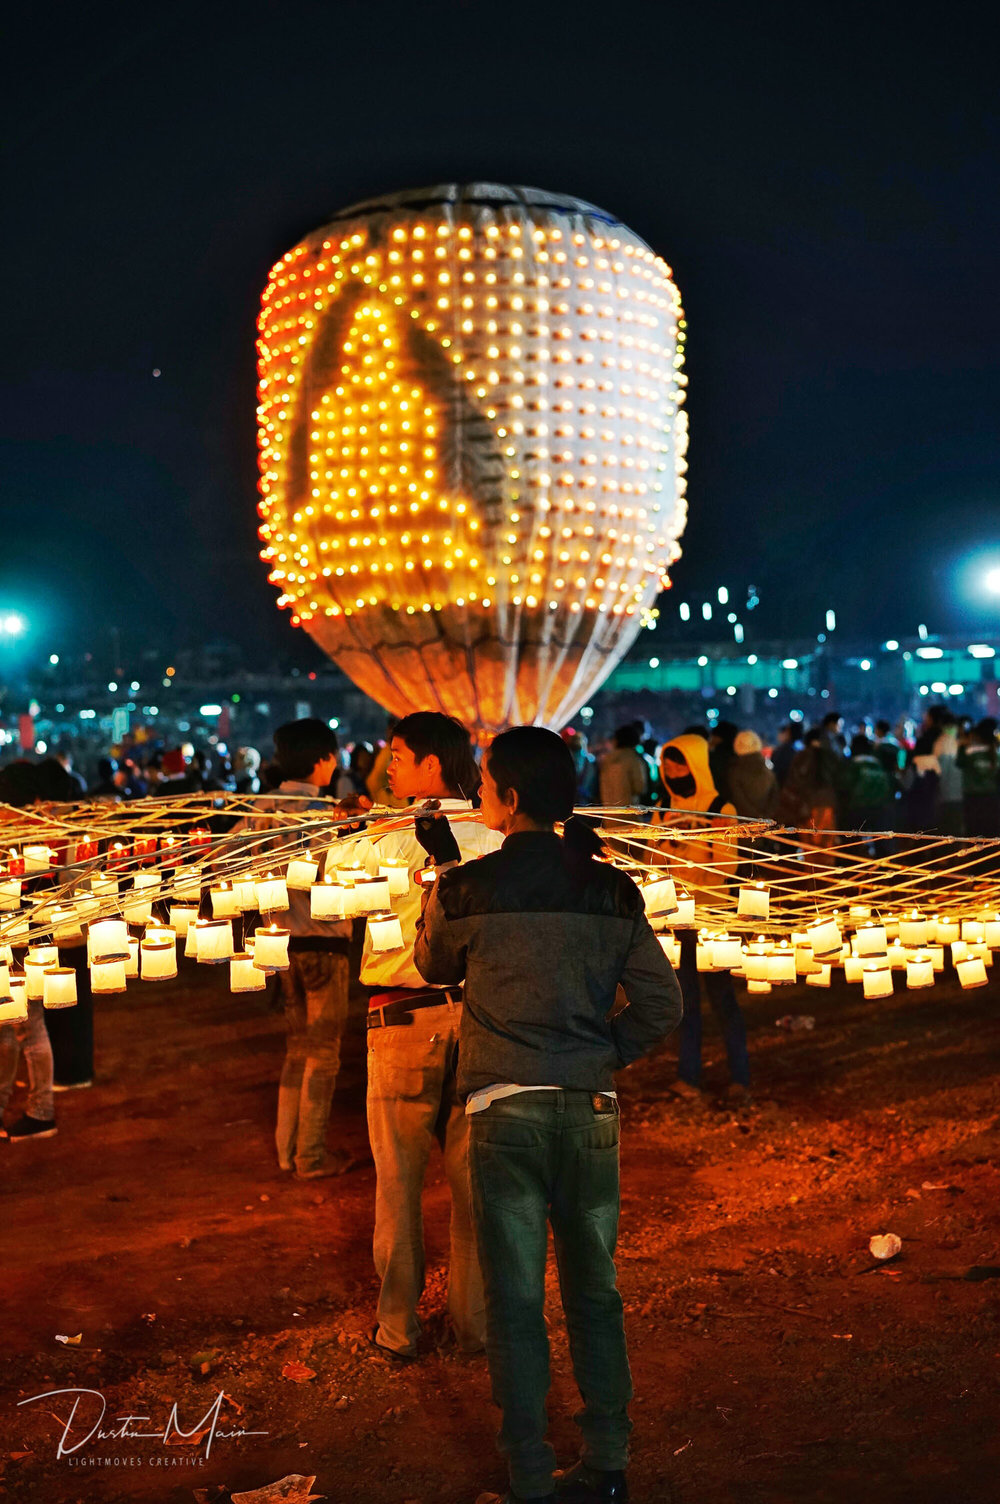  The candles on the fire balloon make the shape of a Buddha.  © Dustin Main 2016 